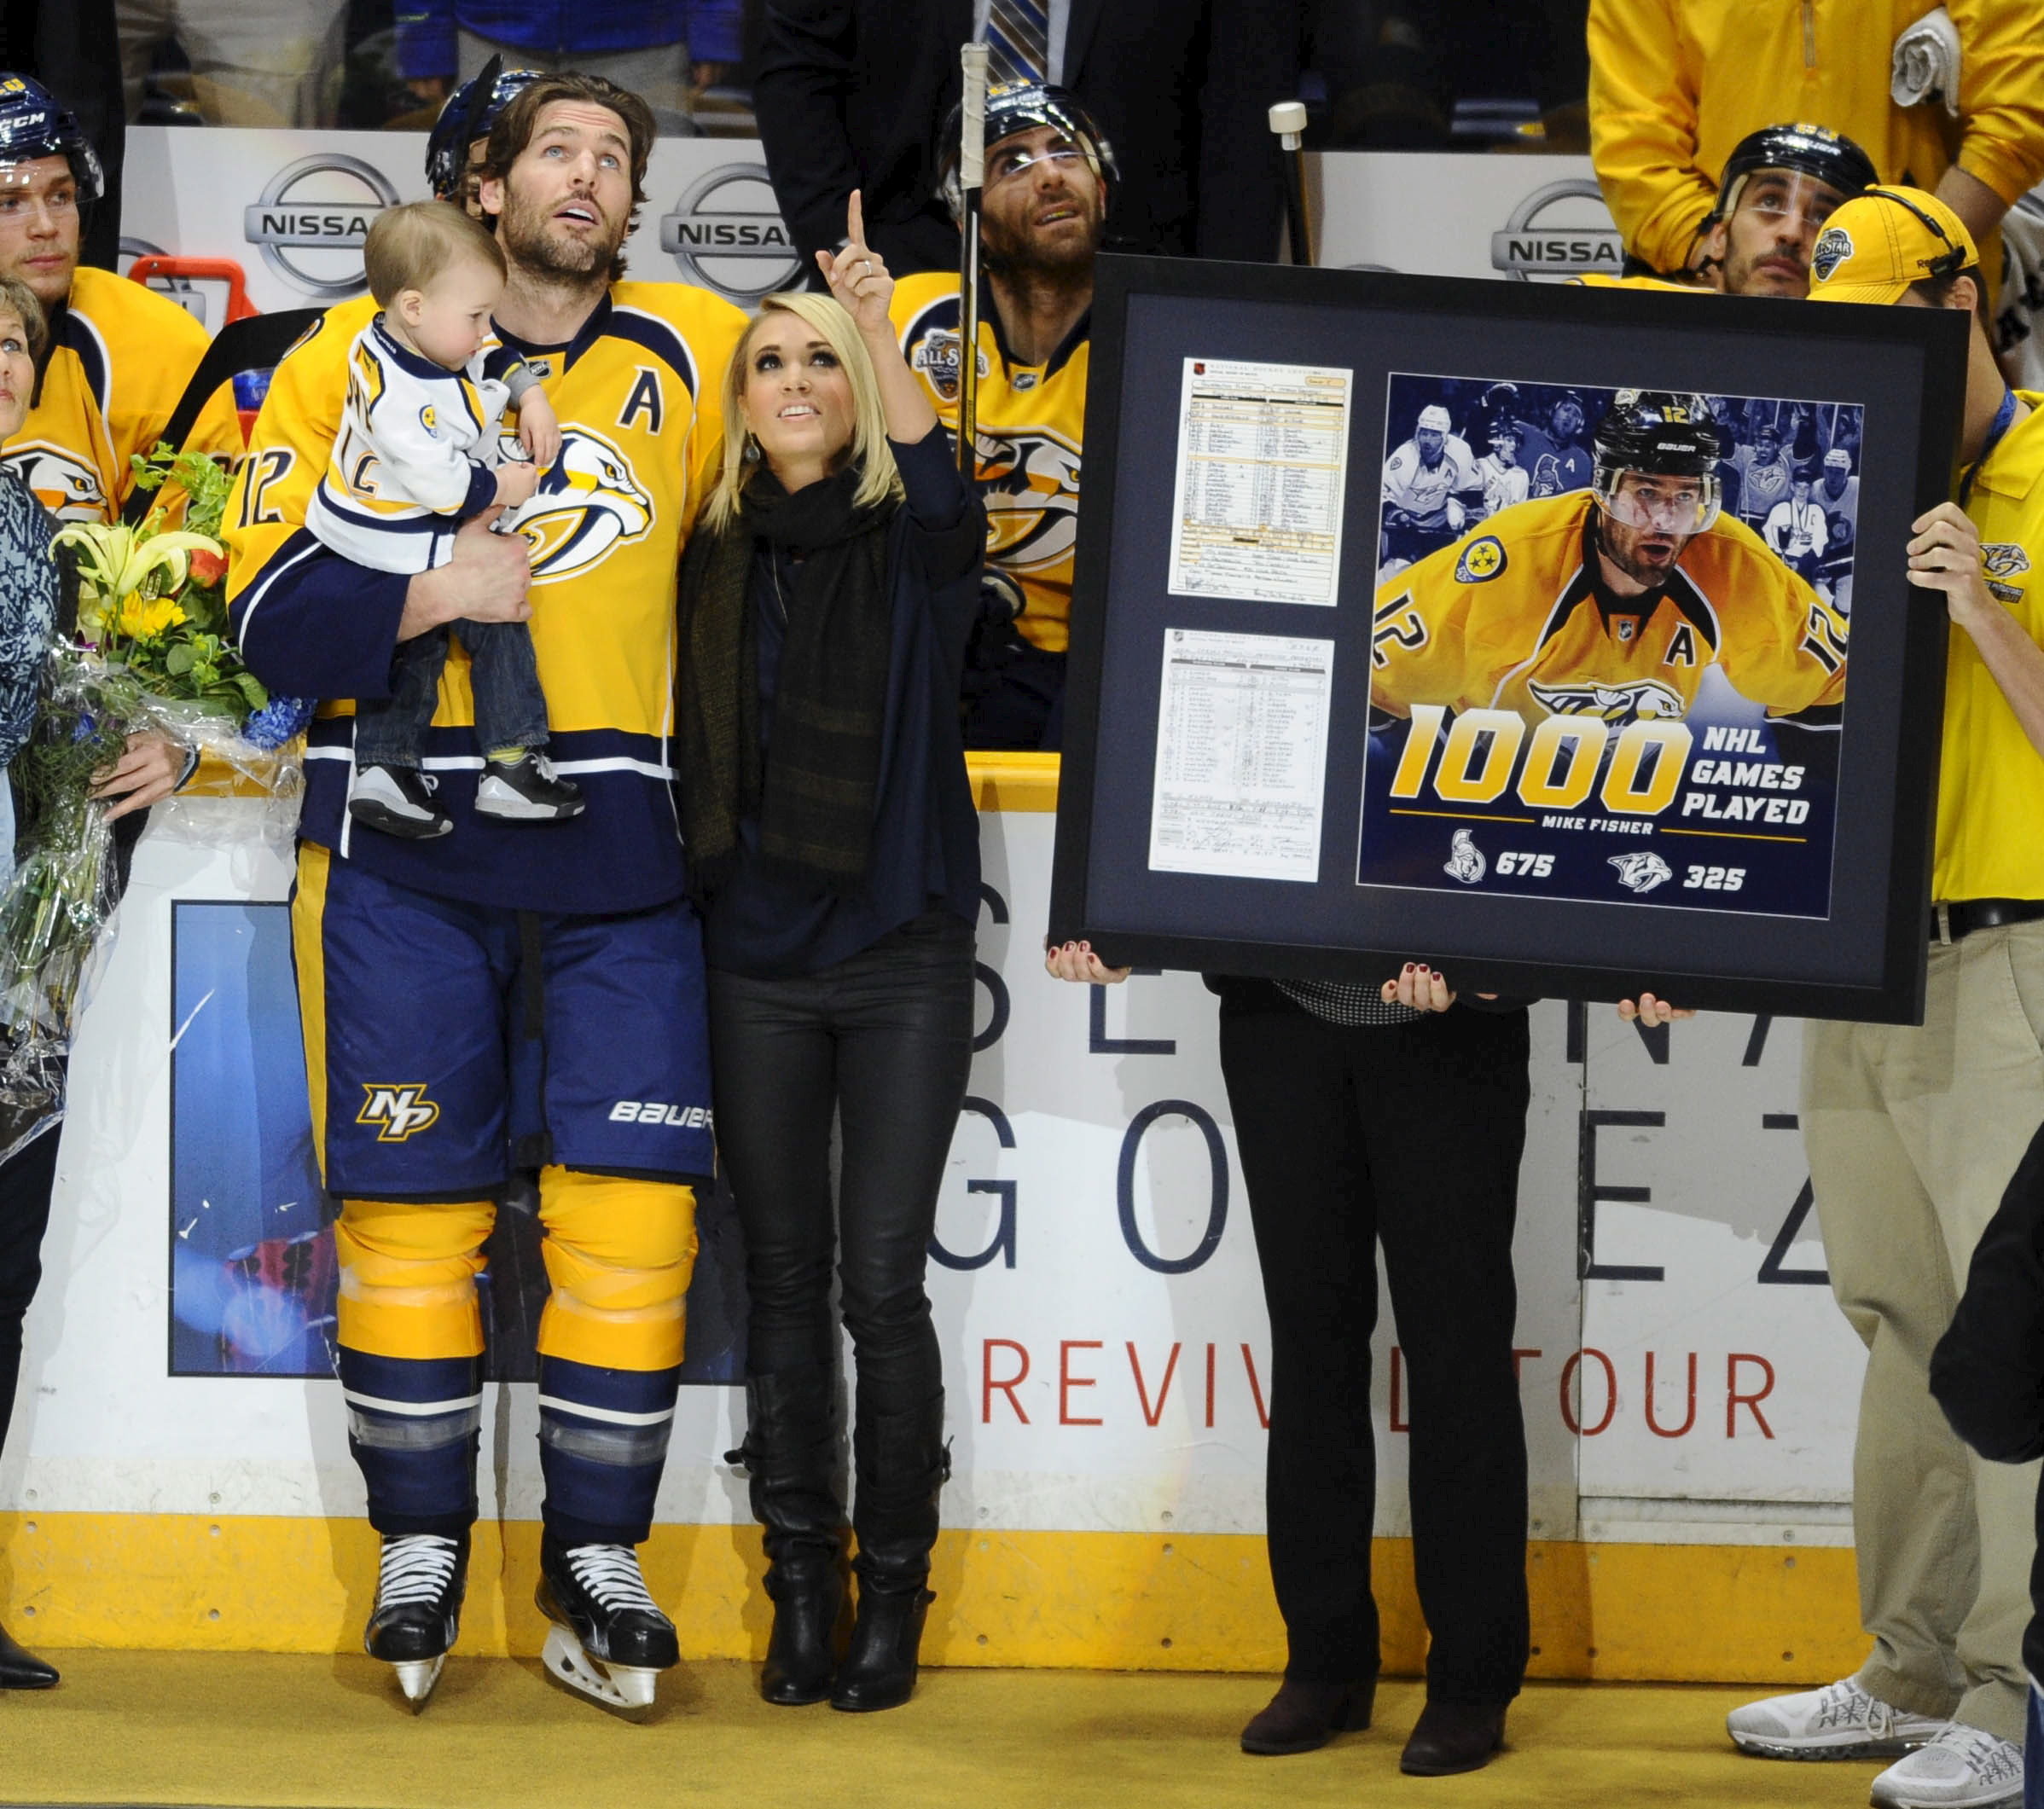 Mike Fisher's iconic jersey